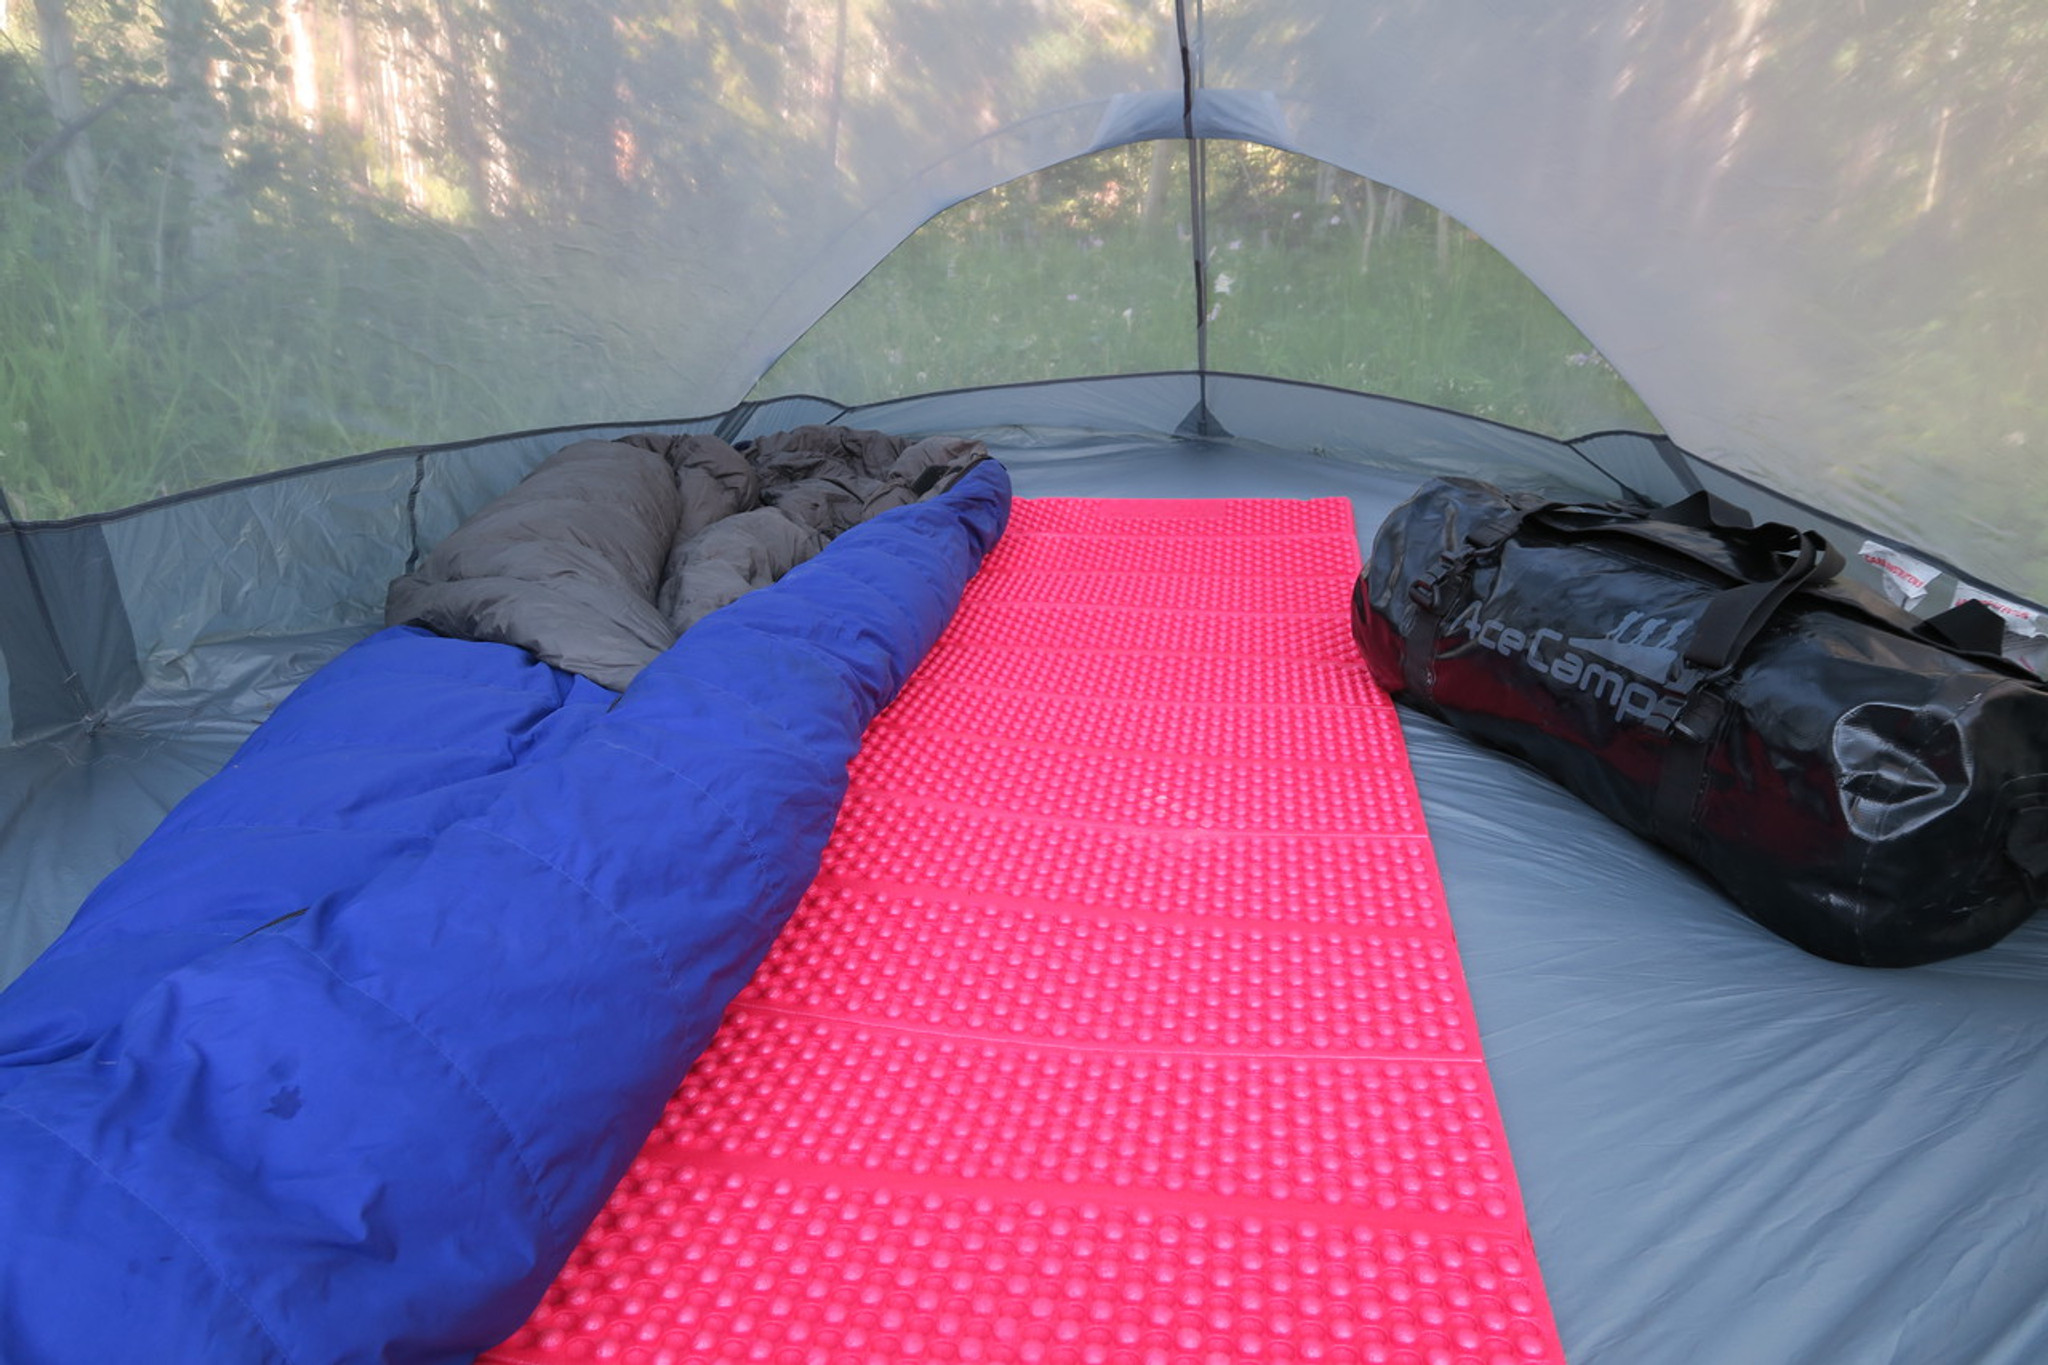 Double Size XPE Foam Folding Sleeping Camping Mat For 2 Person-Outdoor  gear, ODM, OEM, cutomization factory